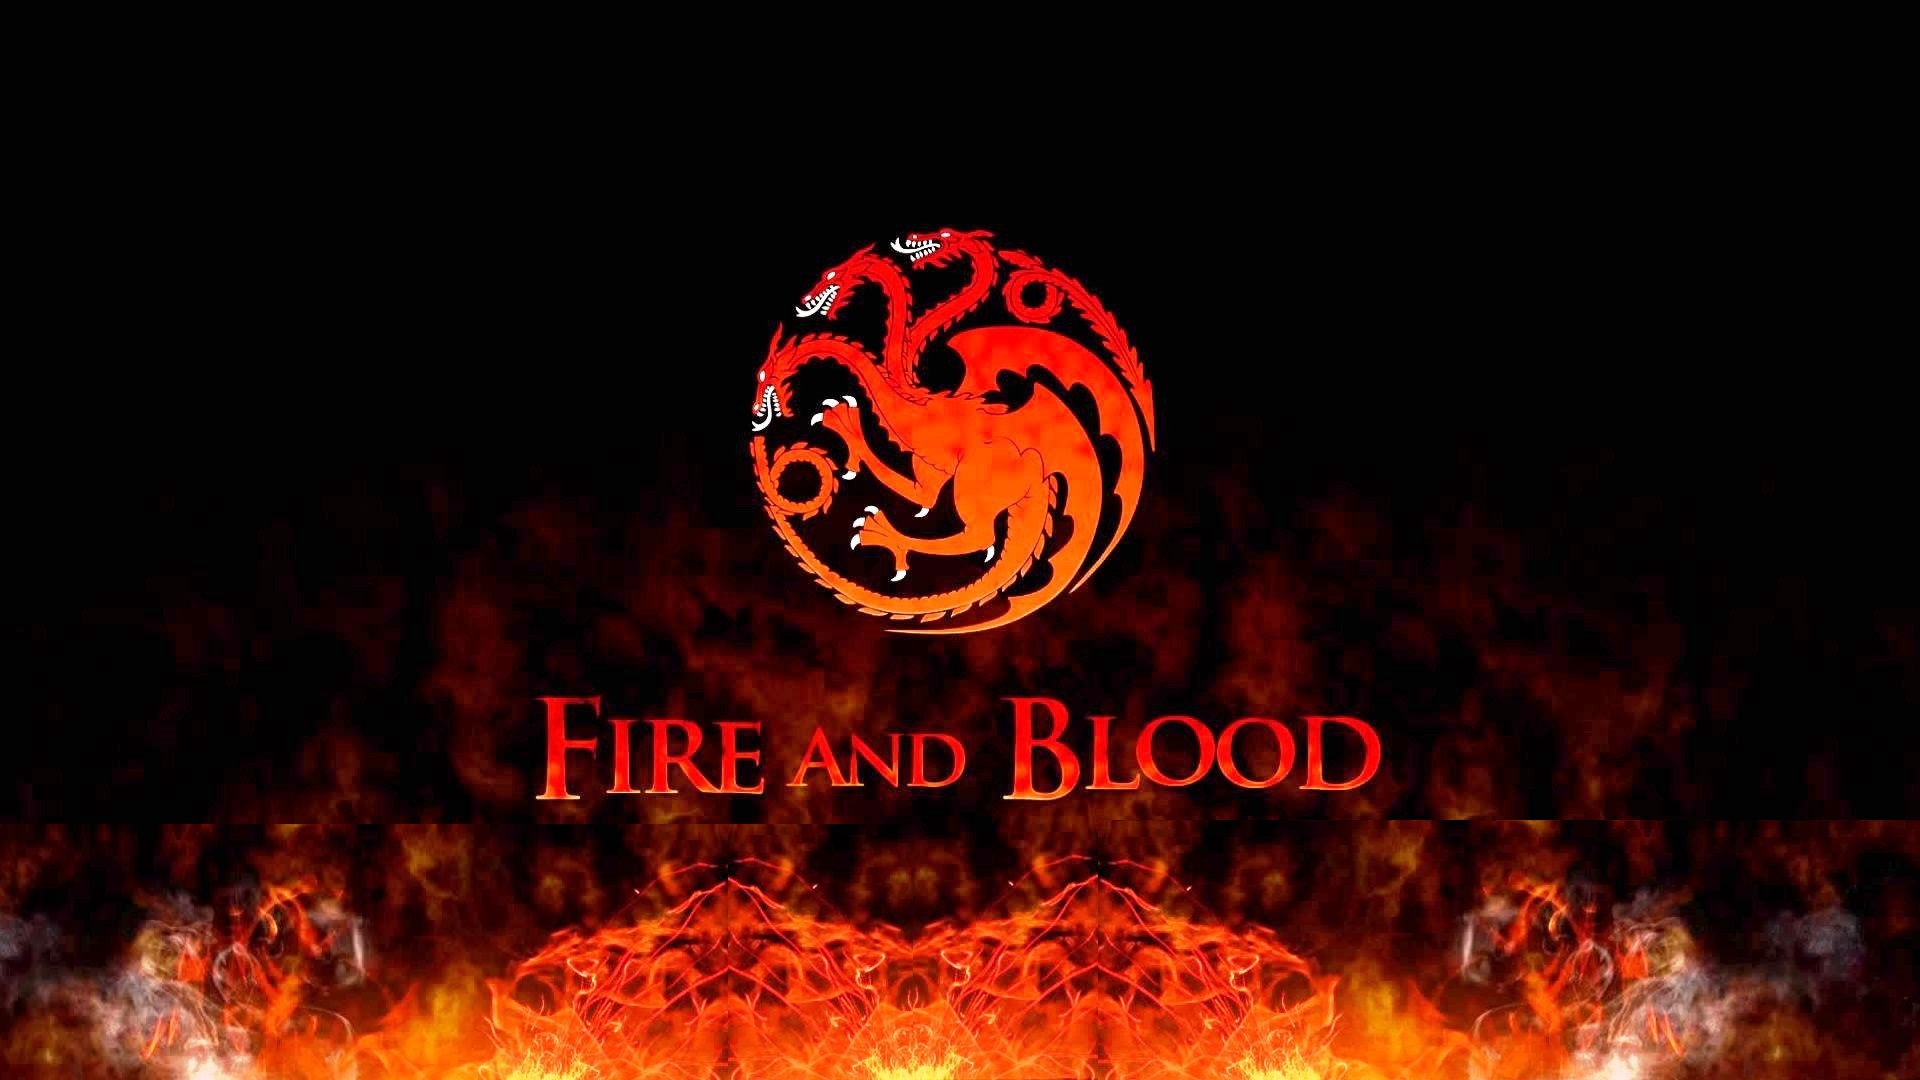 House Targaryen Game of Thrones Wallpaper HD With high-resolution 1920X1080 pixel. You can use this wallpaper for your Desktop Computer Backgrounds, Mac Wallpapers, Android Lock screen or iPhone Screensavers and another smartphone device